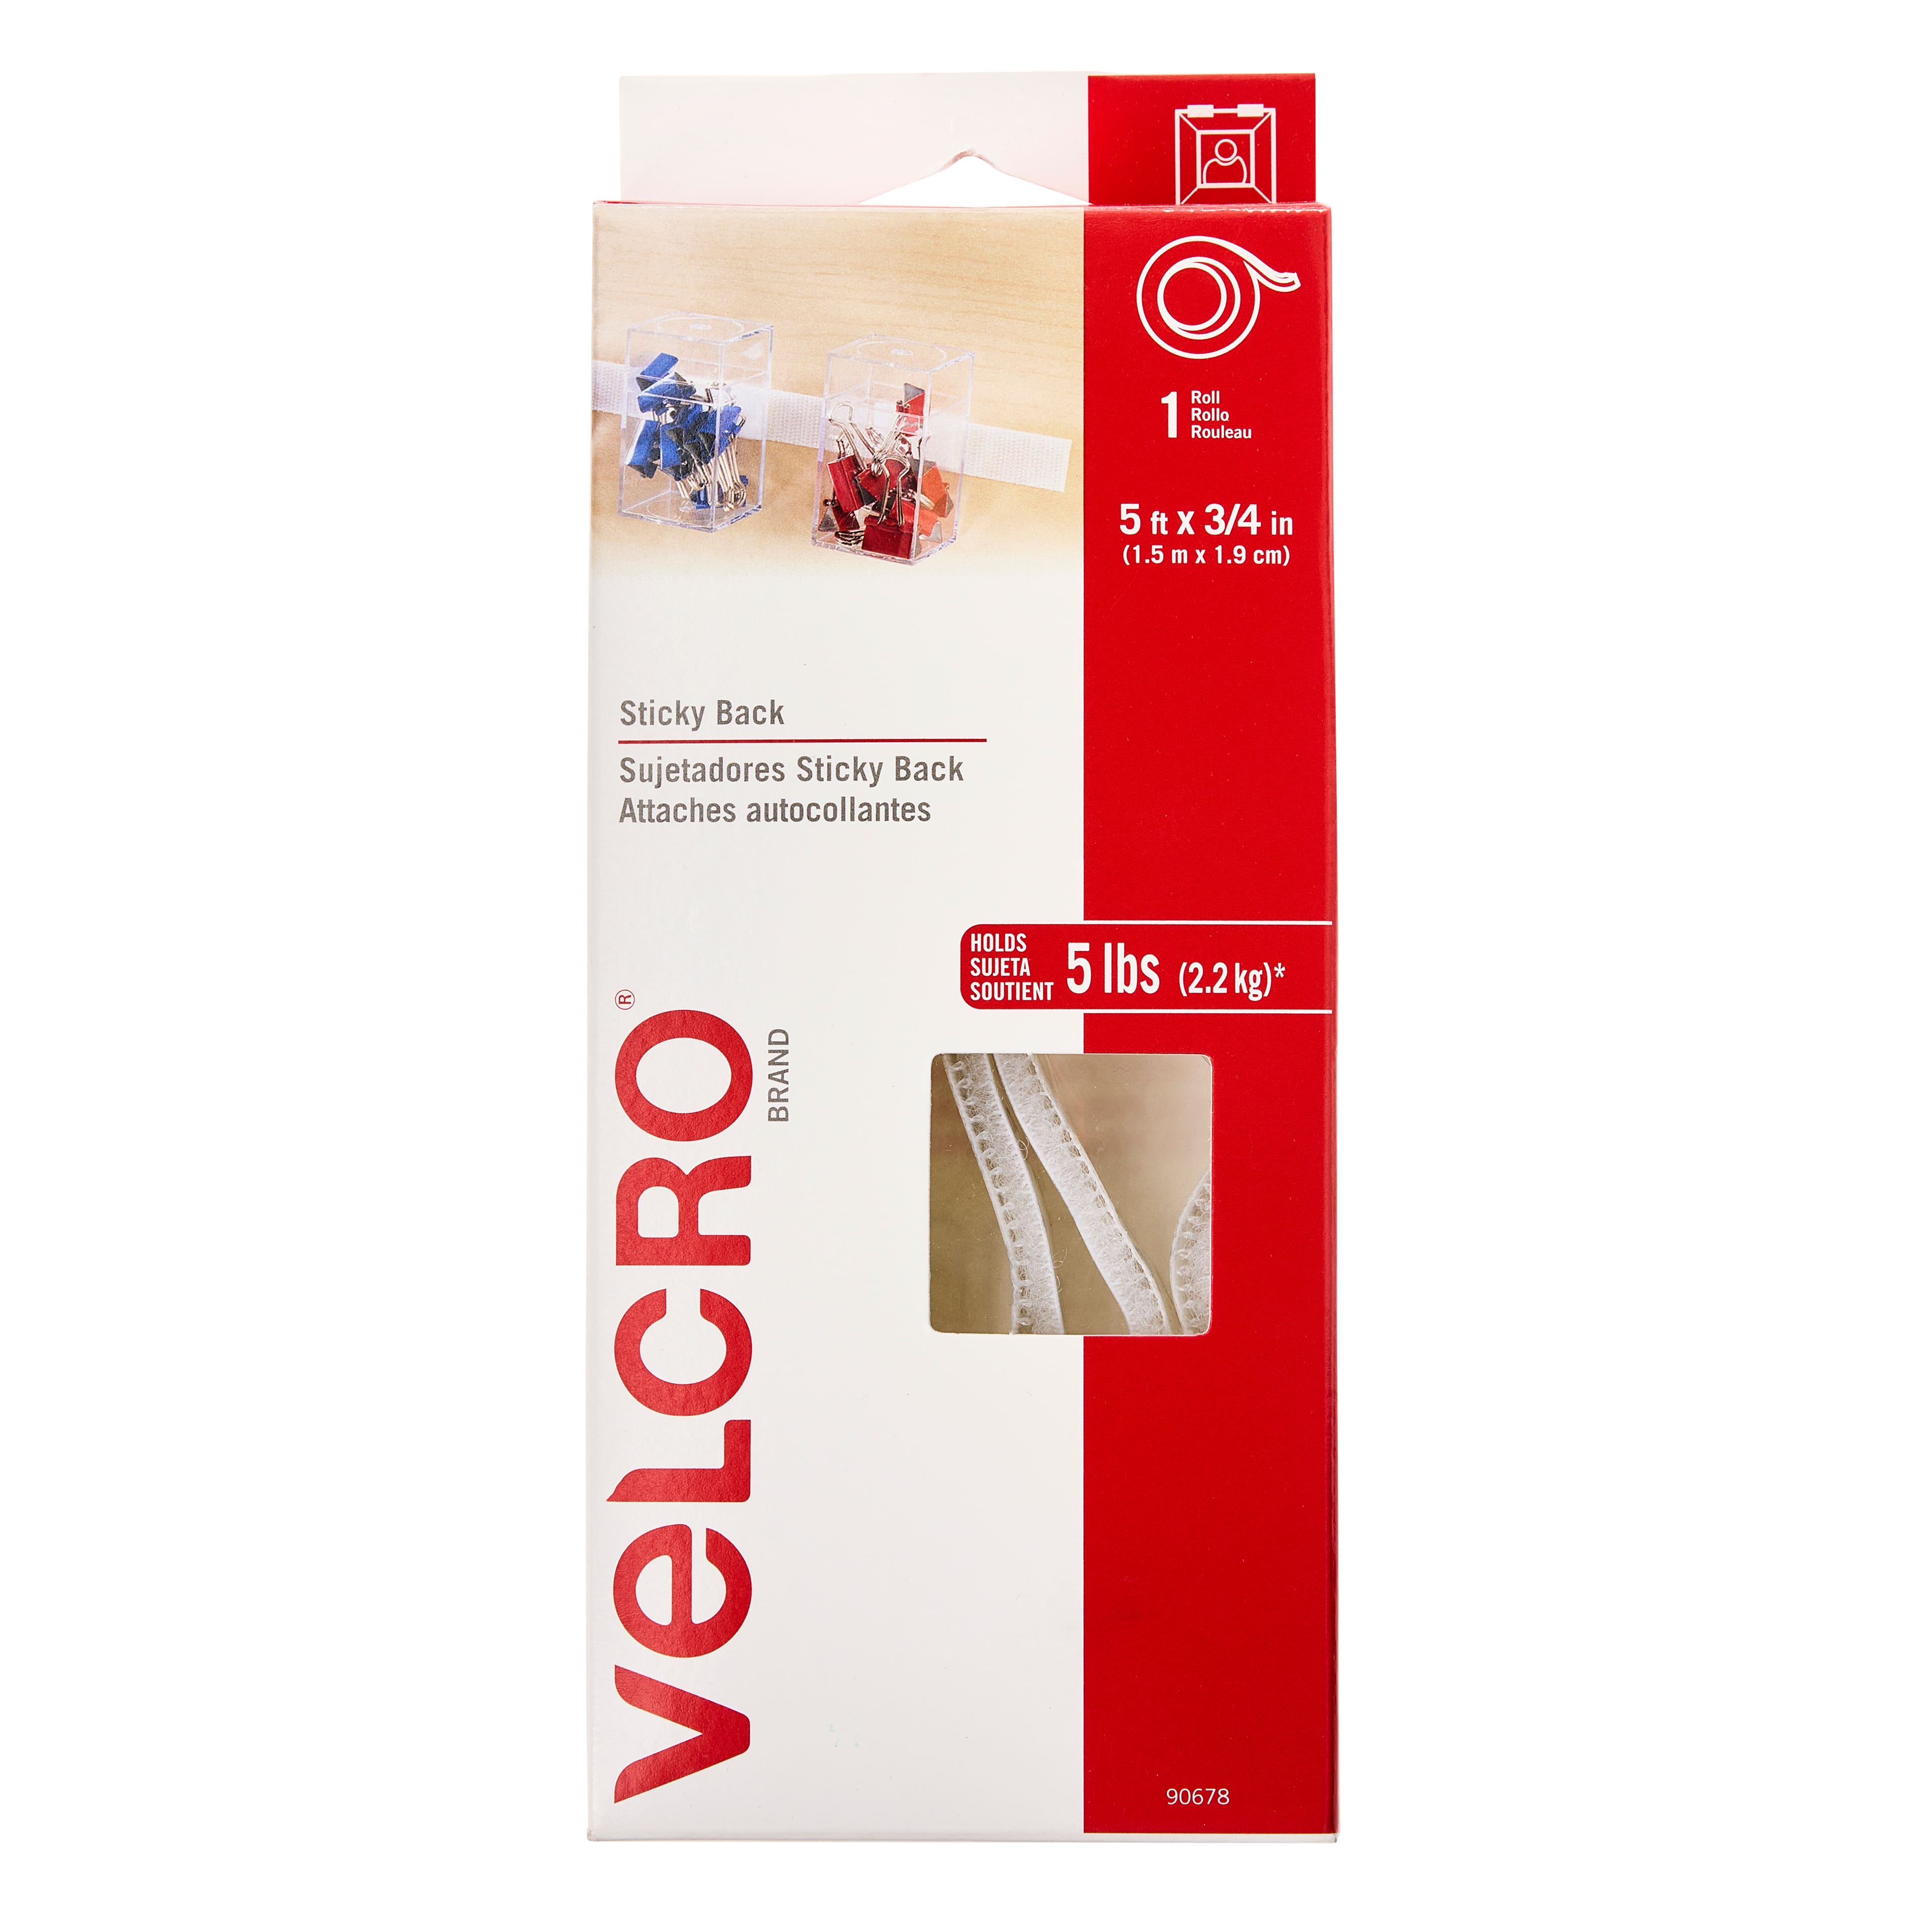 VELCRO Brand Sticky Back Tape Strips with Adhesive | 10 Count | Black 3 1/2  x 3/4 In | Hook and Loop Fasteners for Home Organization, Classroom or